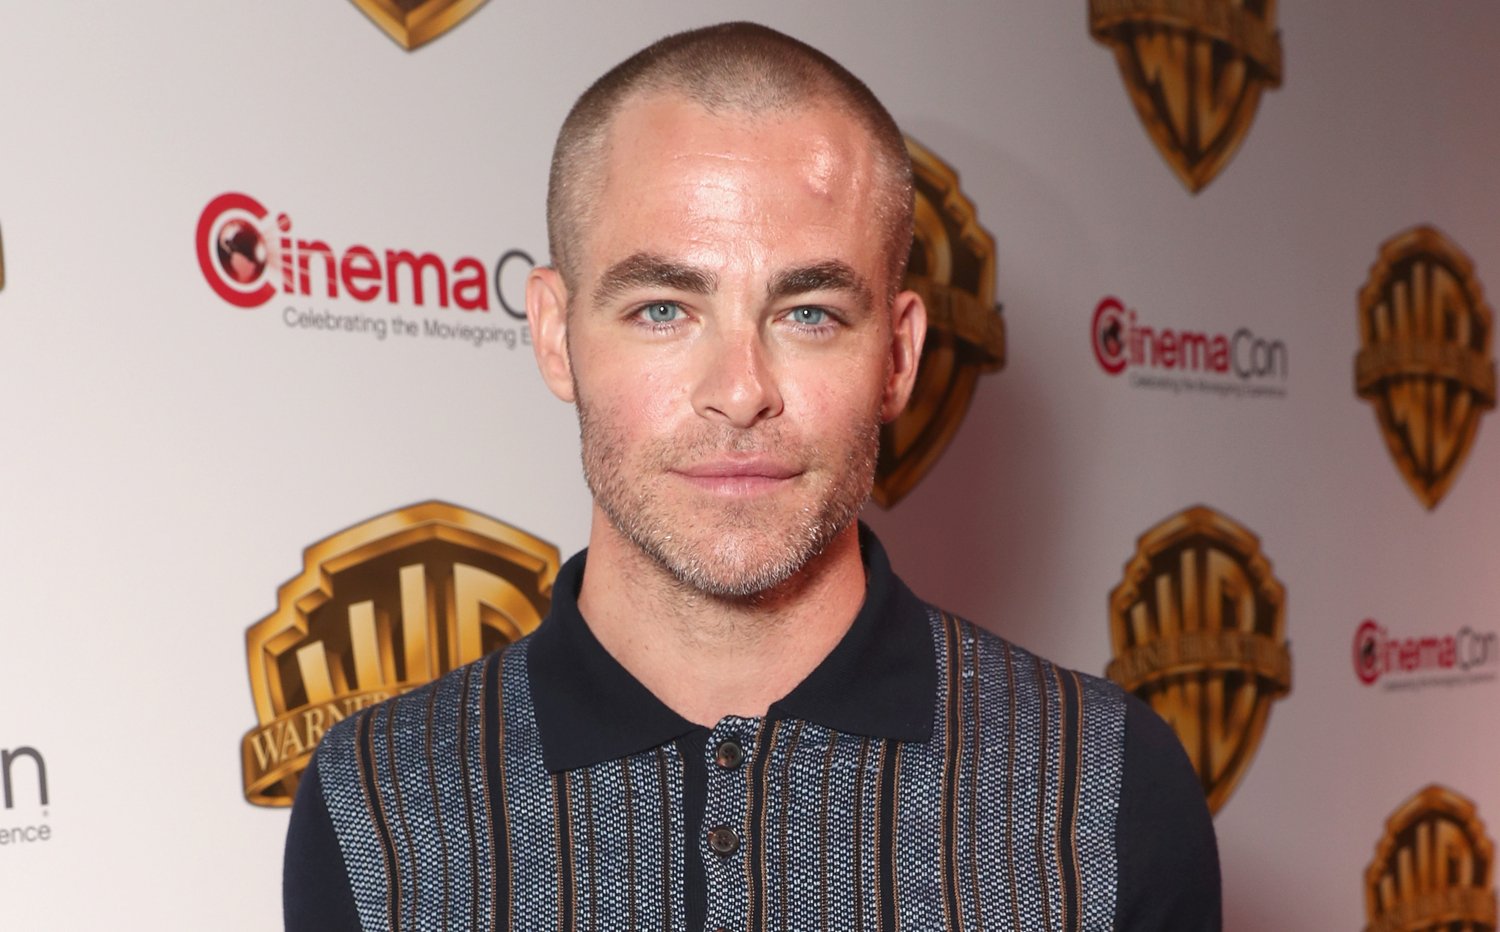 Chris Pine Shaves Off All His Hair – See His Bald New Haircut! Chris Pine  Shaves Off All His Hair – See His Bald New Haircut! | 2017 CinemaCon, Chris  Pine | Just Jared